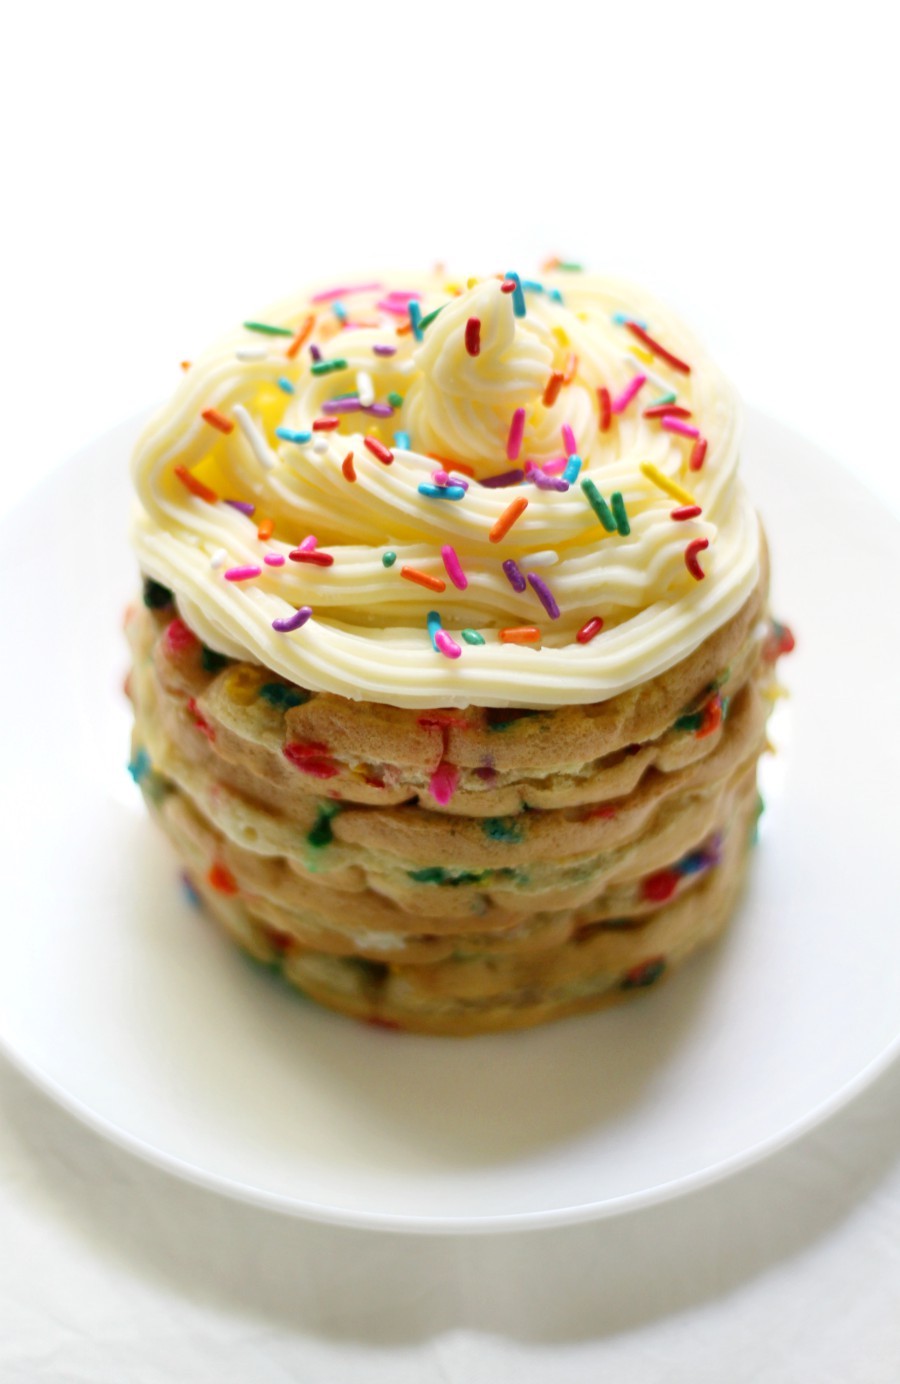 Gluten-Free Funfetti Waffle Cake (Vegan, Allergy-Free) | Strength and Sunshine @RebeccaGF666 A fun way to celebrate any occasion! This colorful Gluten-Free Funfetti Waffle Cake is vegan, top 8 allergy-free, requires minimal ingredients, while still being a dessert (or breakfast) recipe to remember! Whether it's a birthday or fun milestone, kids and adults this fun and easy creation!